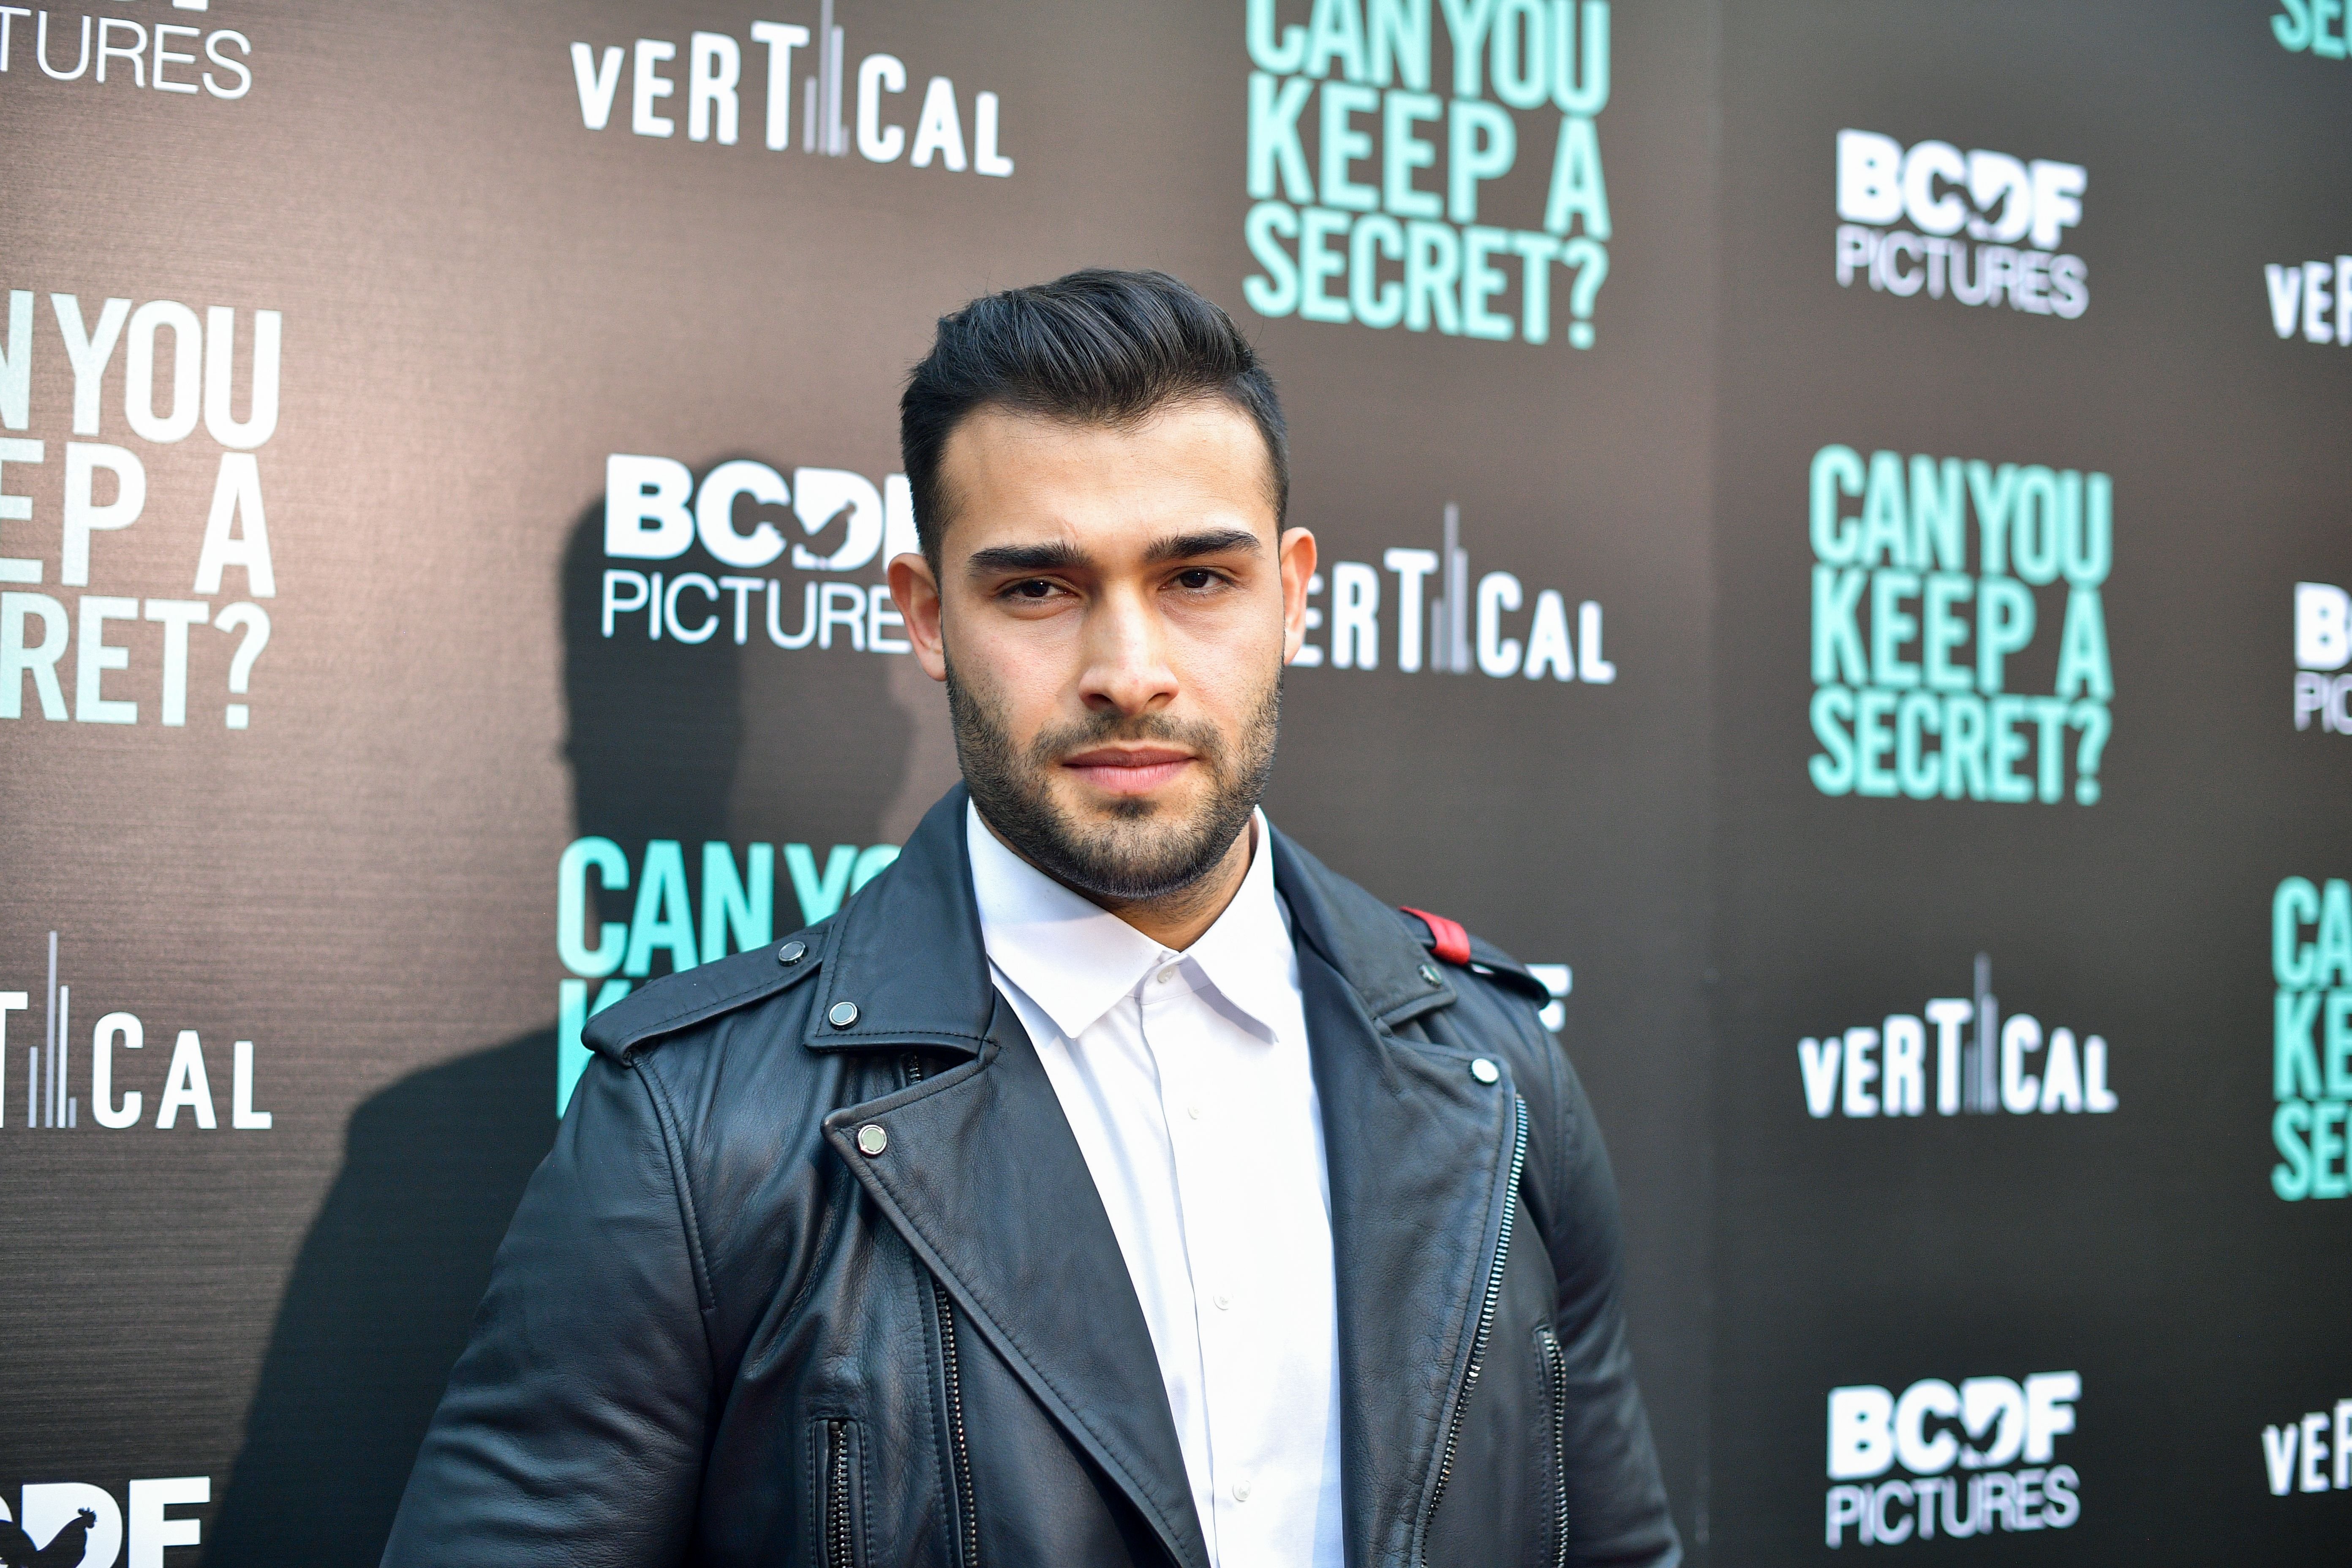 Sam Asghari at the premiere of "Can You Keep A Secret?" at ArcLight Hollywood on August 28, 2019, in California | Photo:  Matt Winkelmeyer/Getty Images)